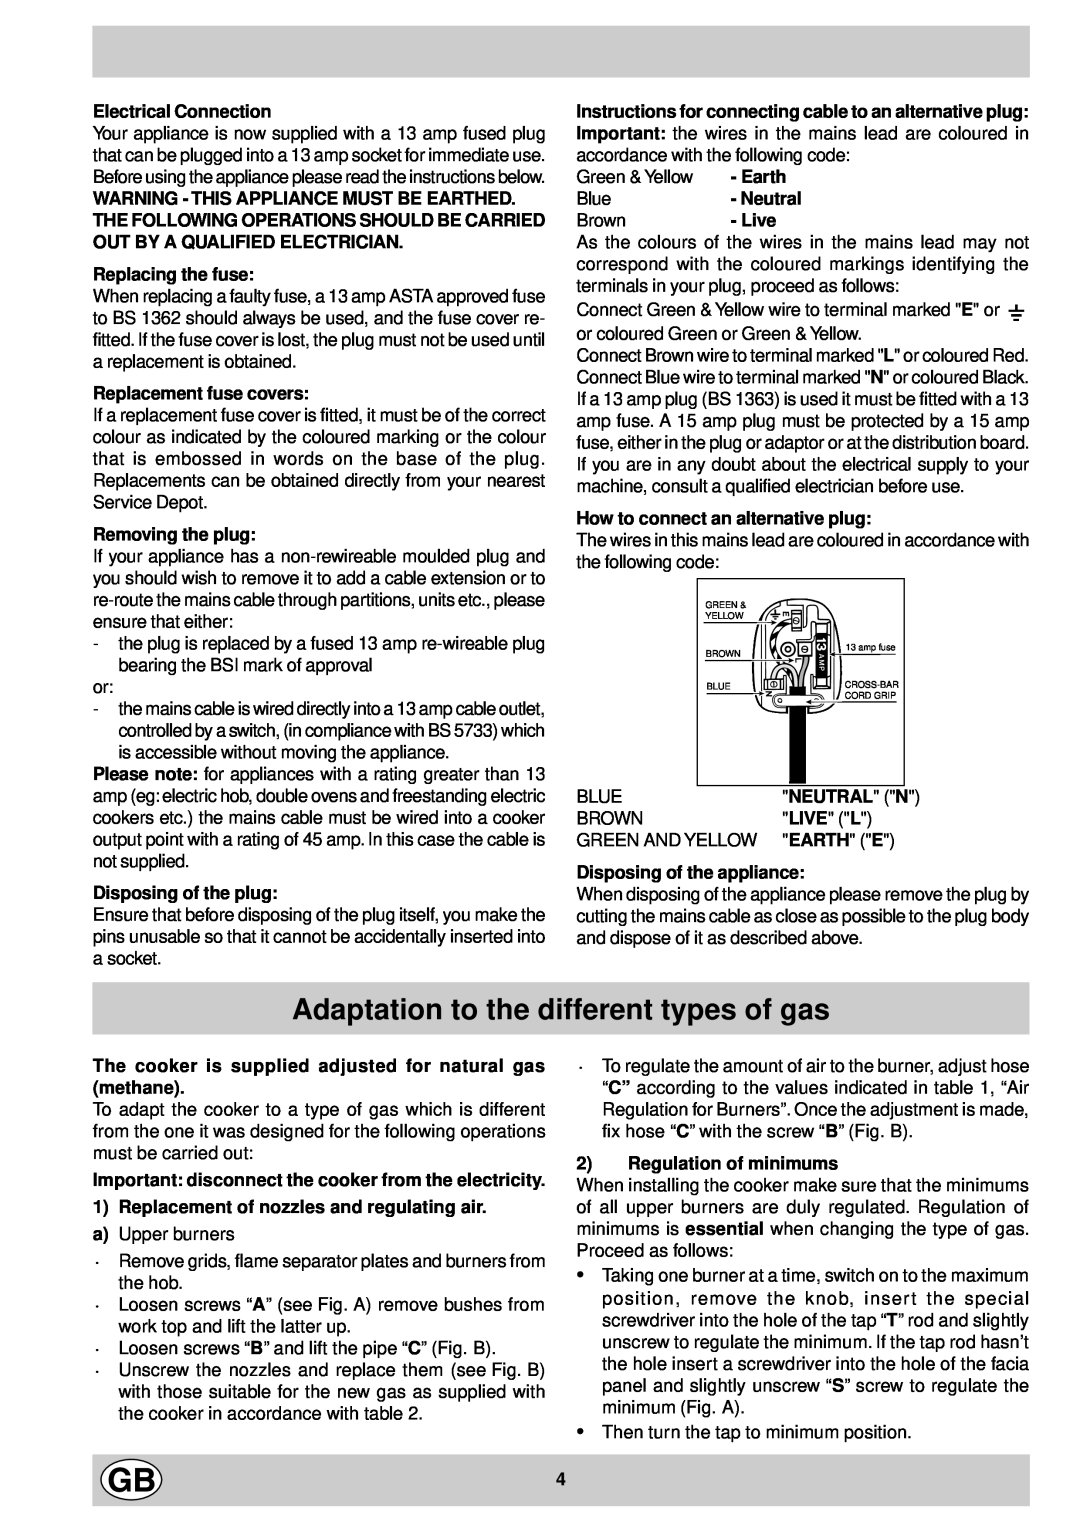 Indesit KG6407 GV/G, KG6407 AV/G, KG6408 XV/G, KG6407 LV/G manual Adaptation to the different types of gas 